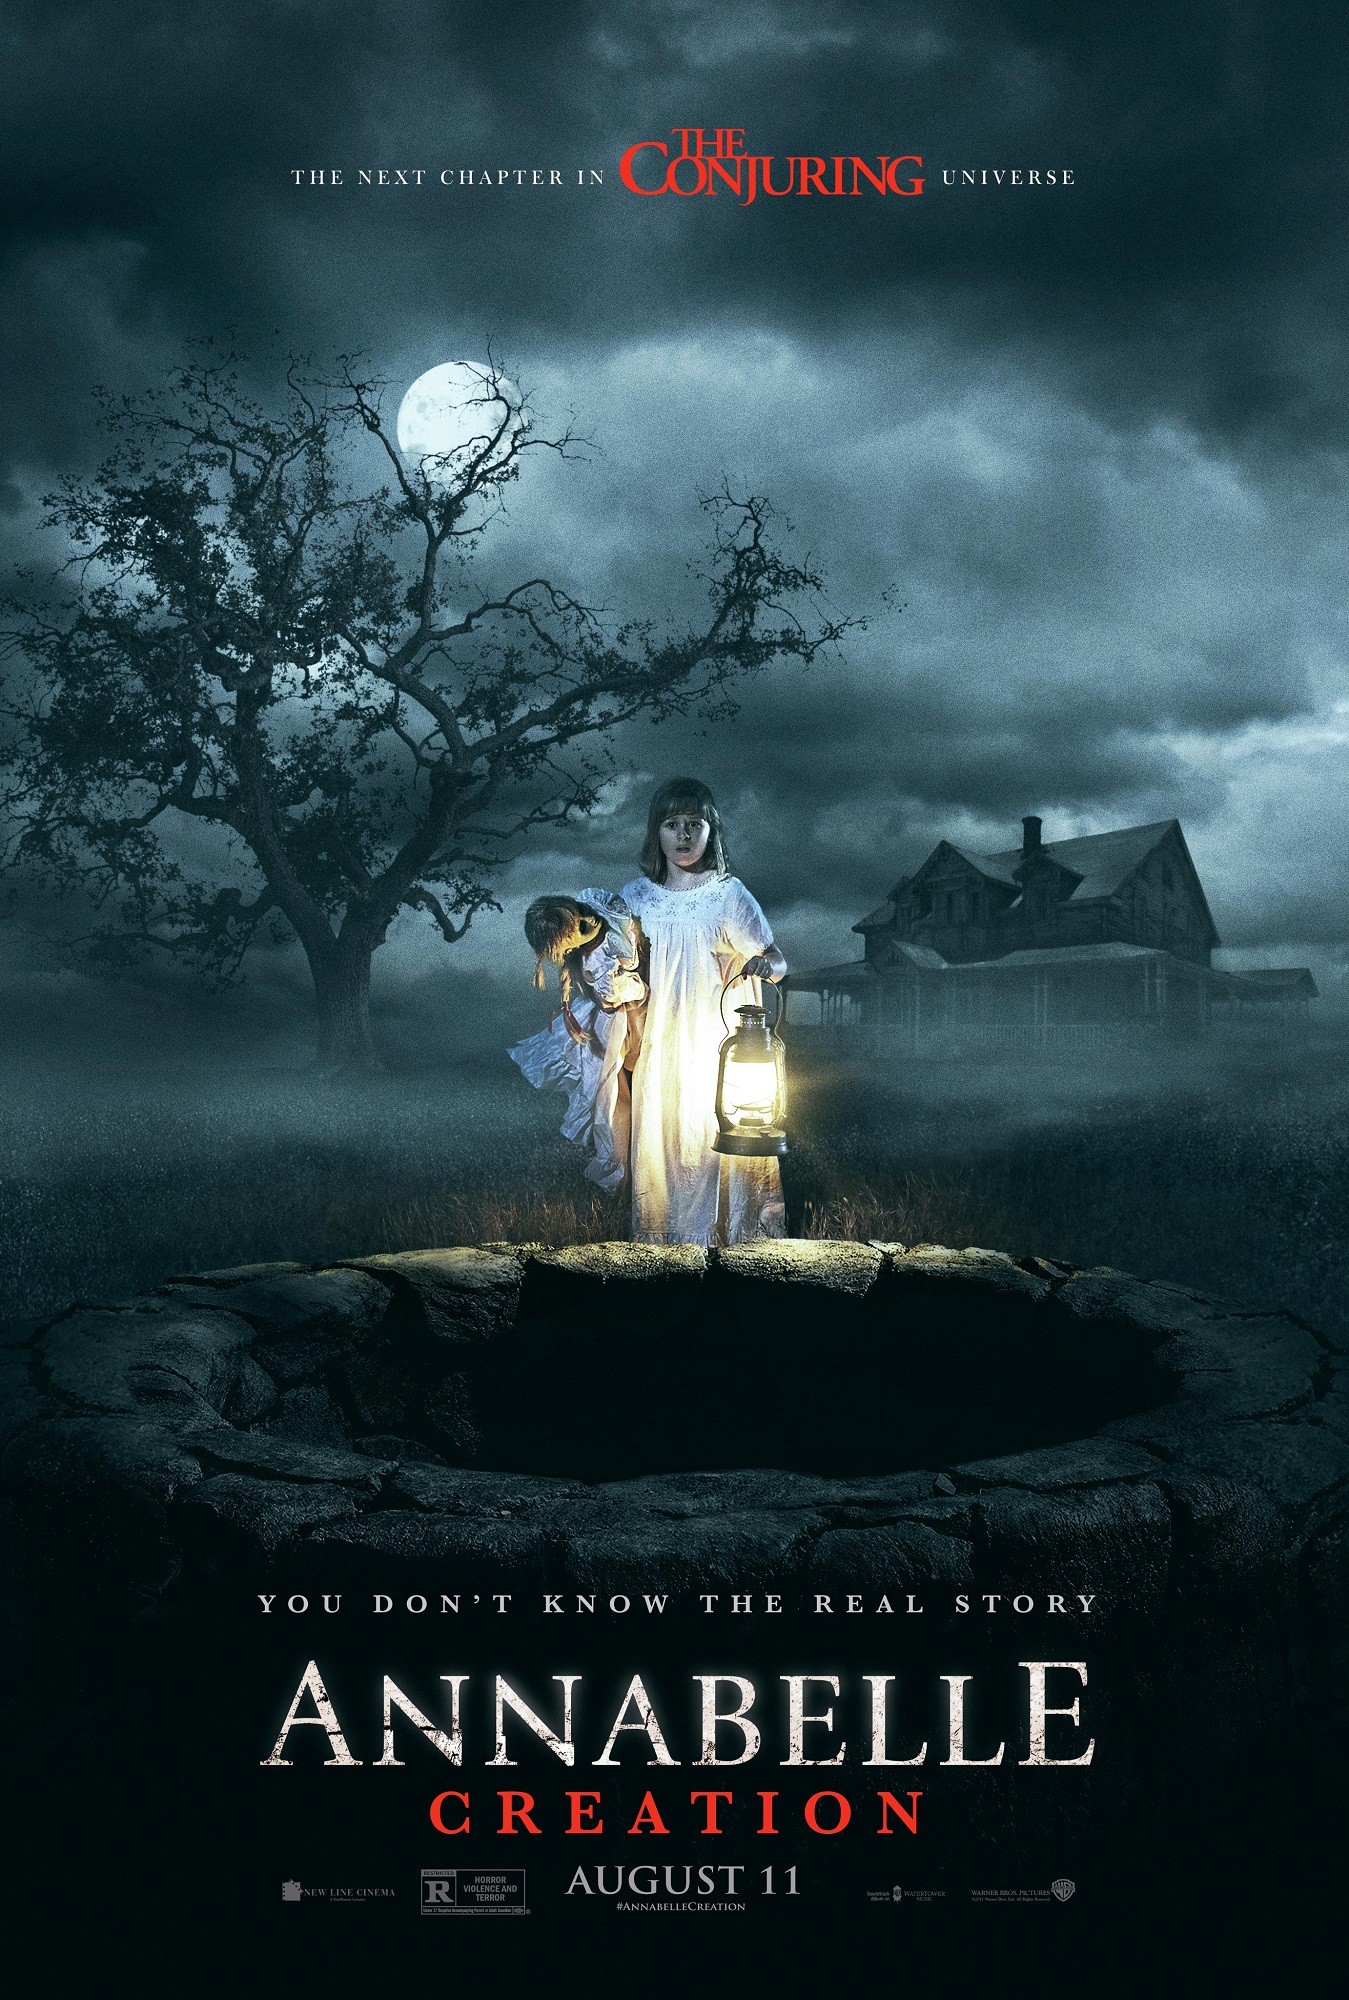 Annabelle: Creation – Why Didn’t I Like It?